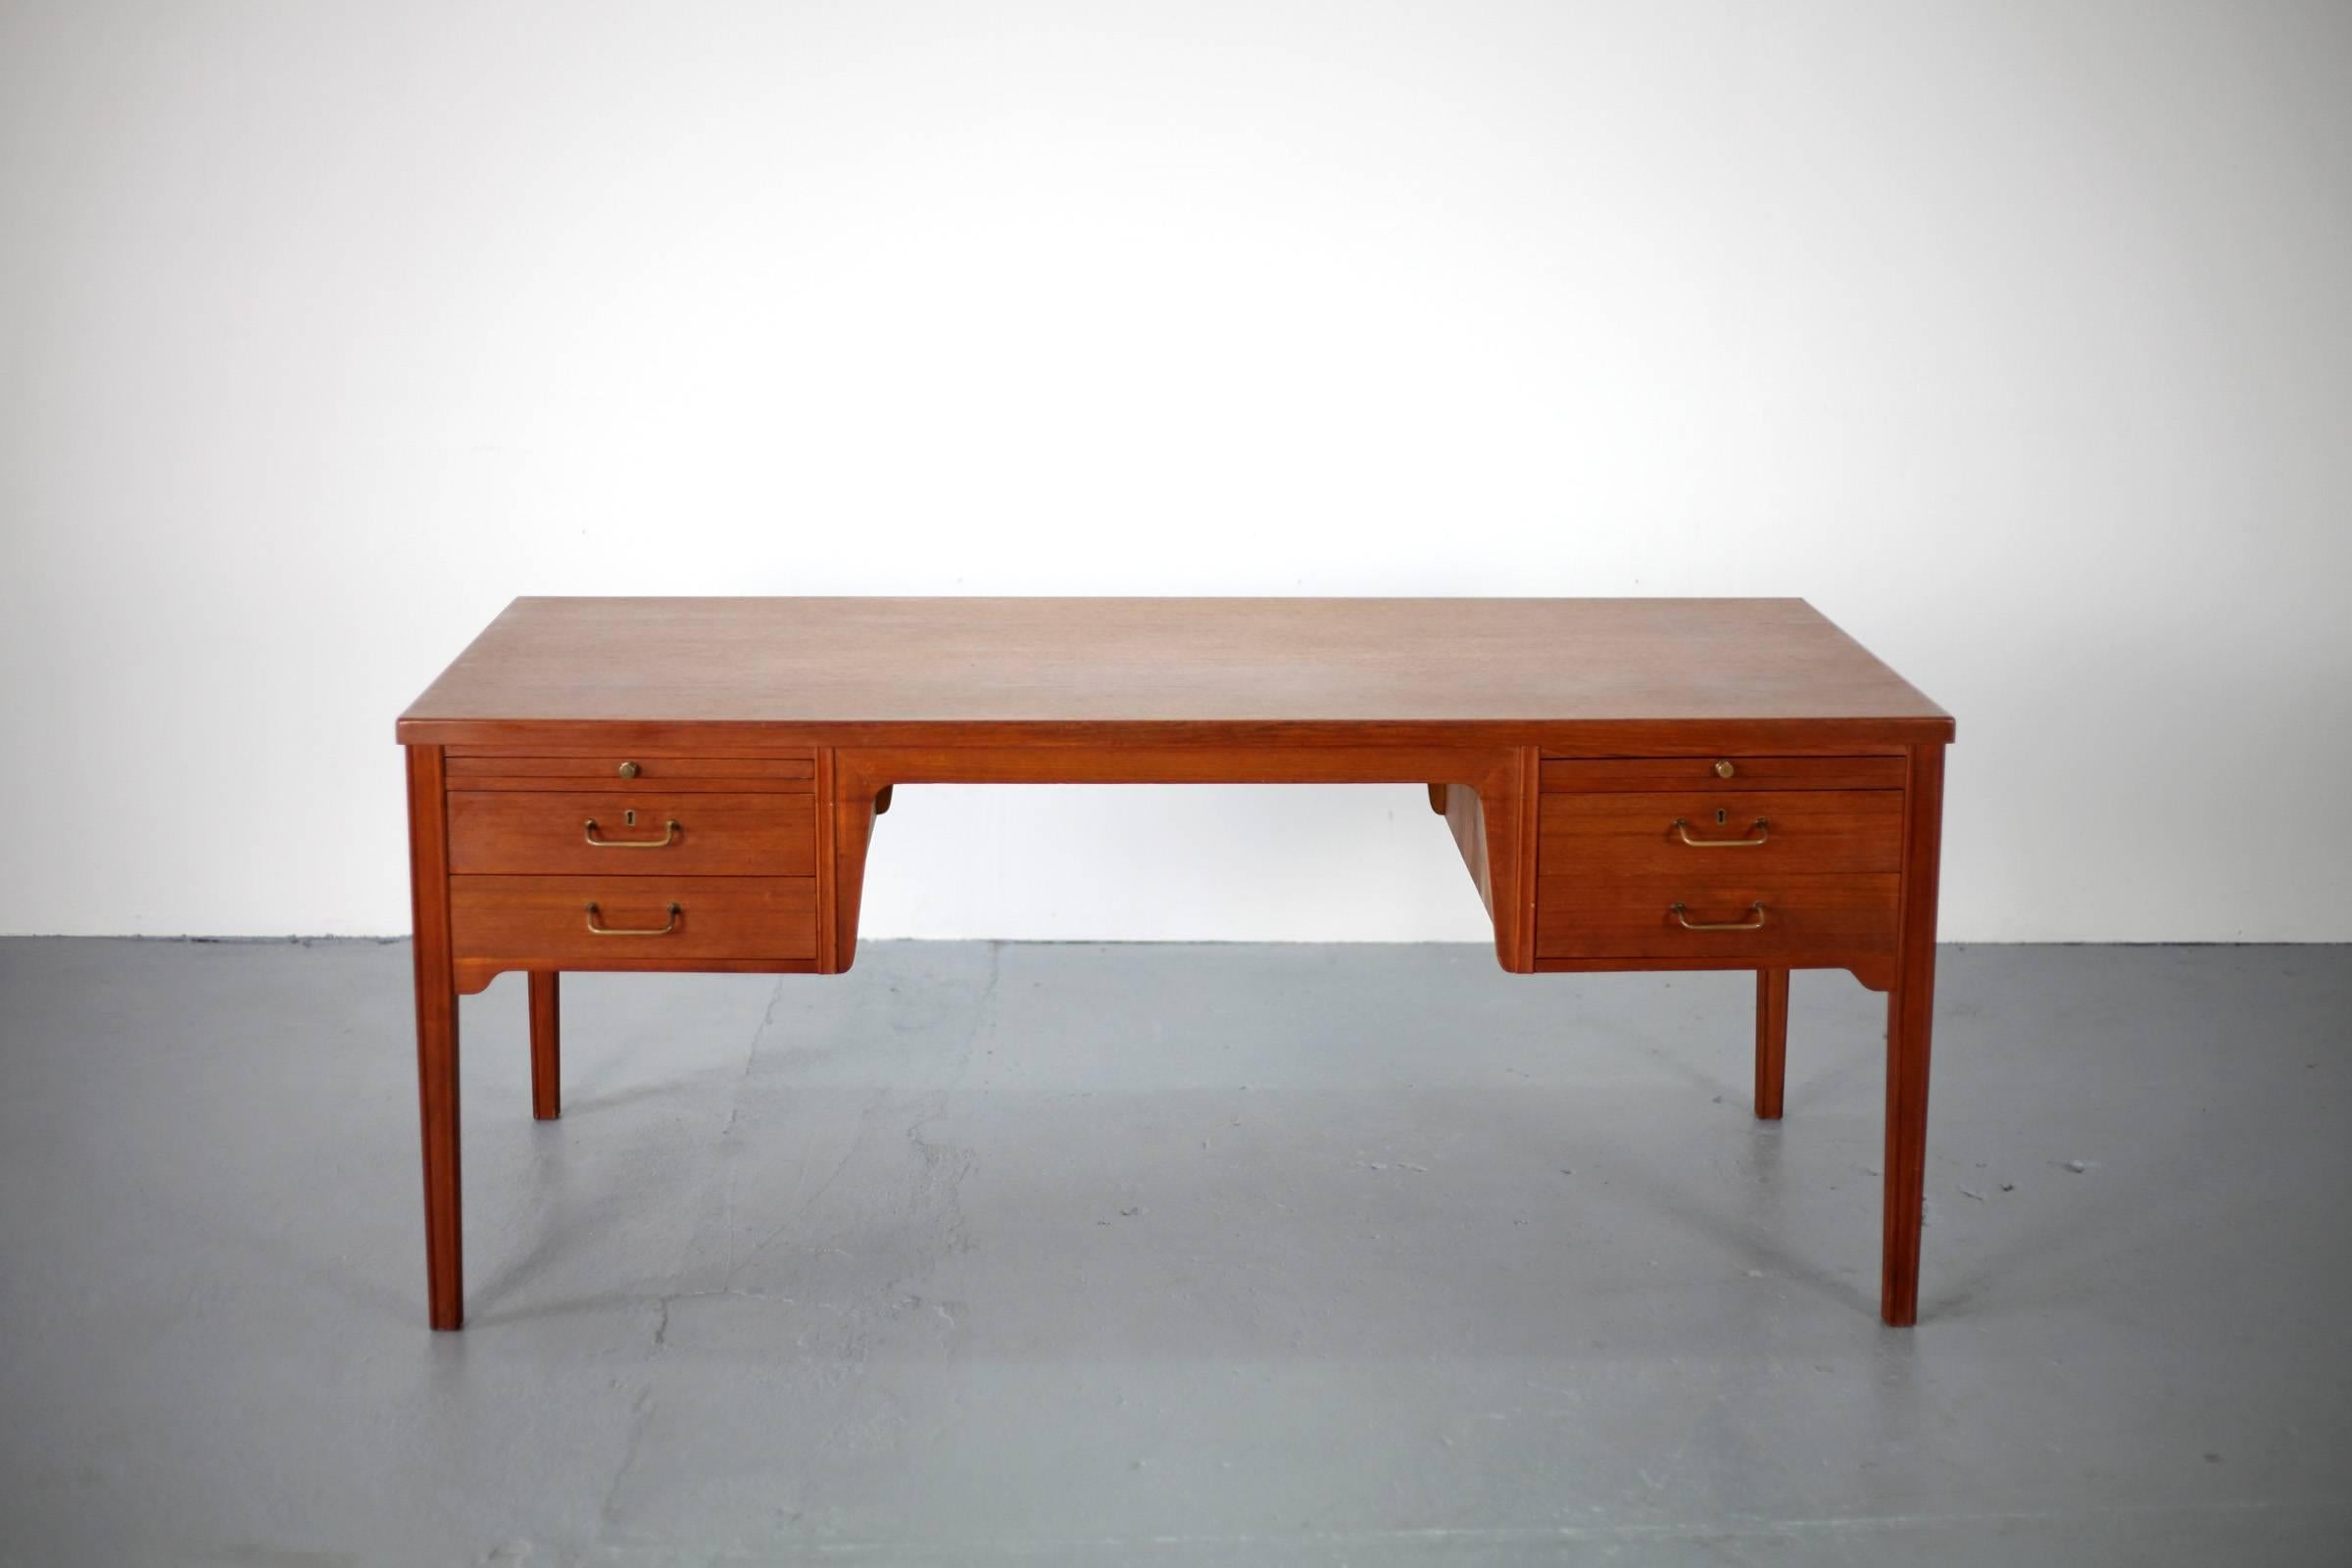 20th Century Beautifully executed Danish Modern Teak Desk from the 1950s